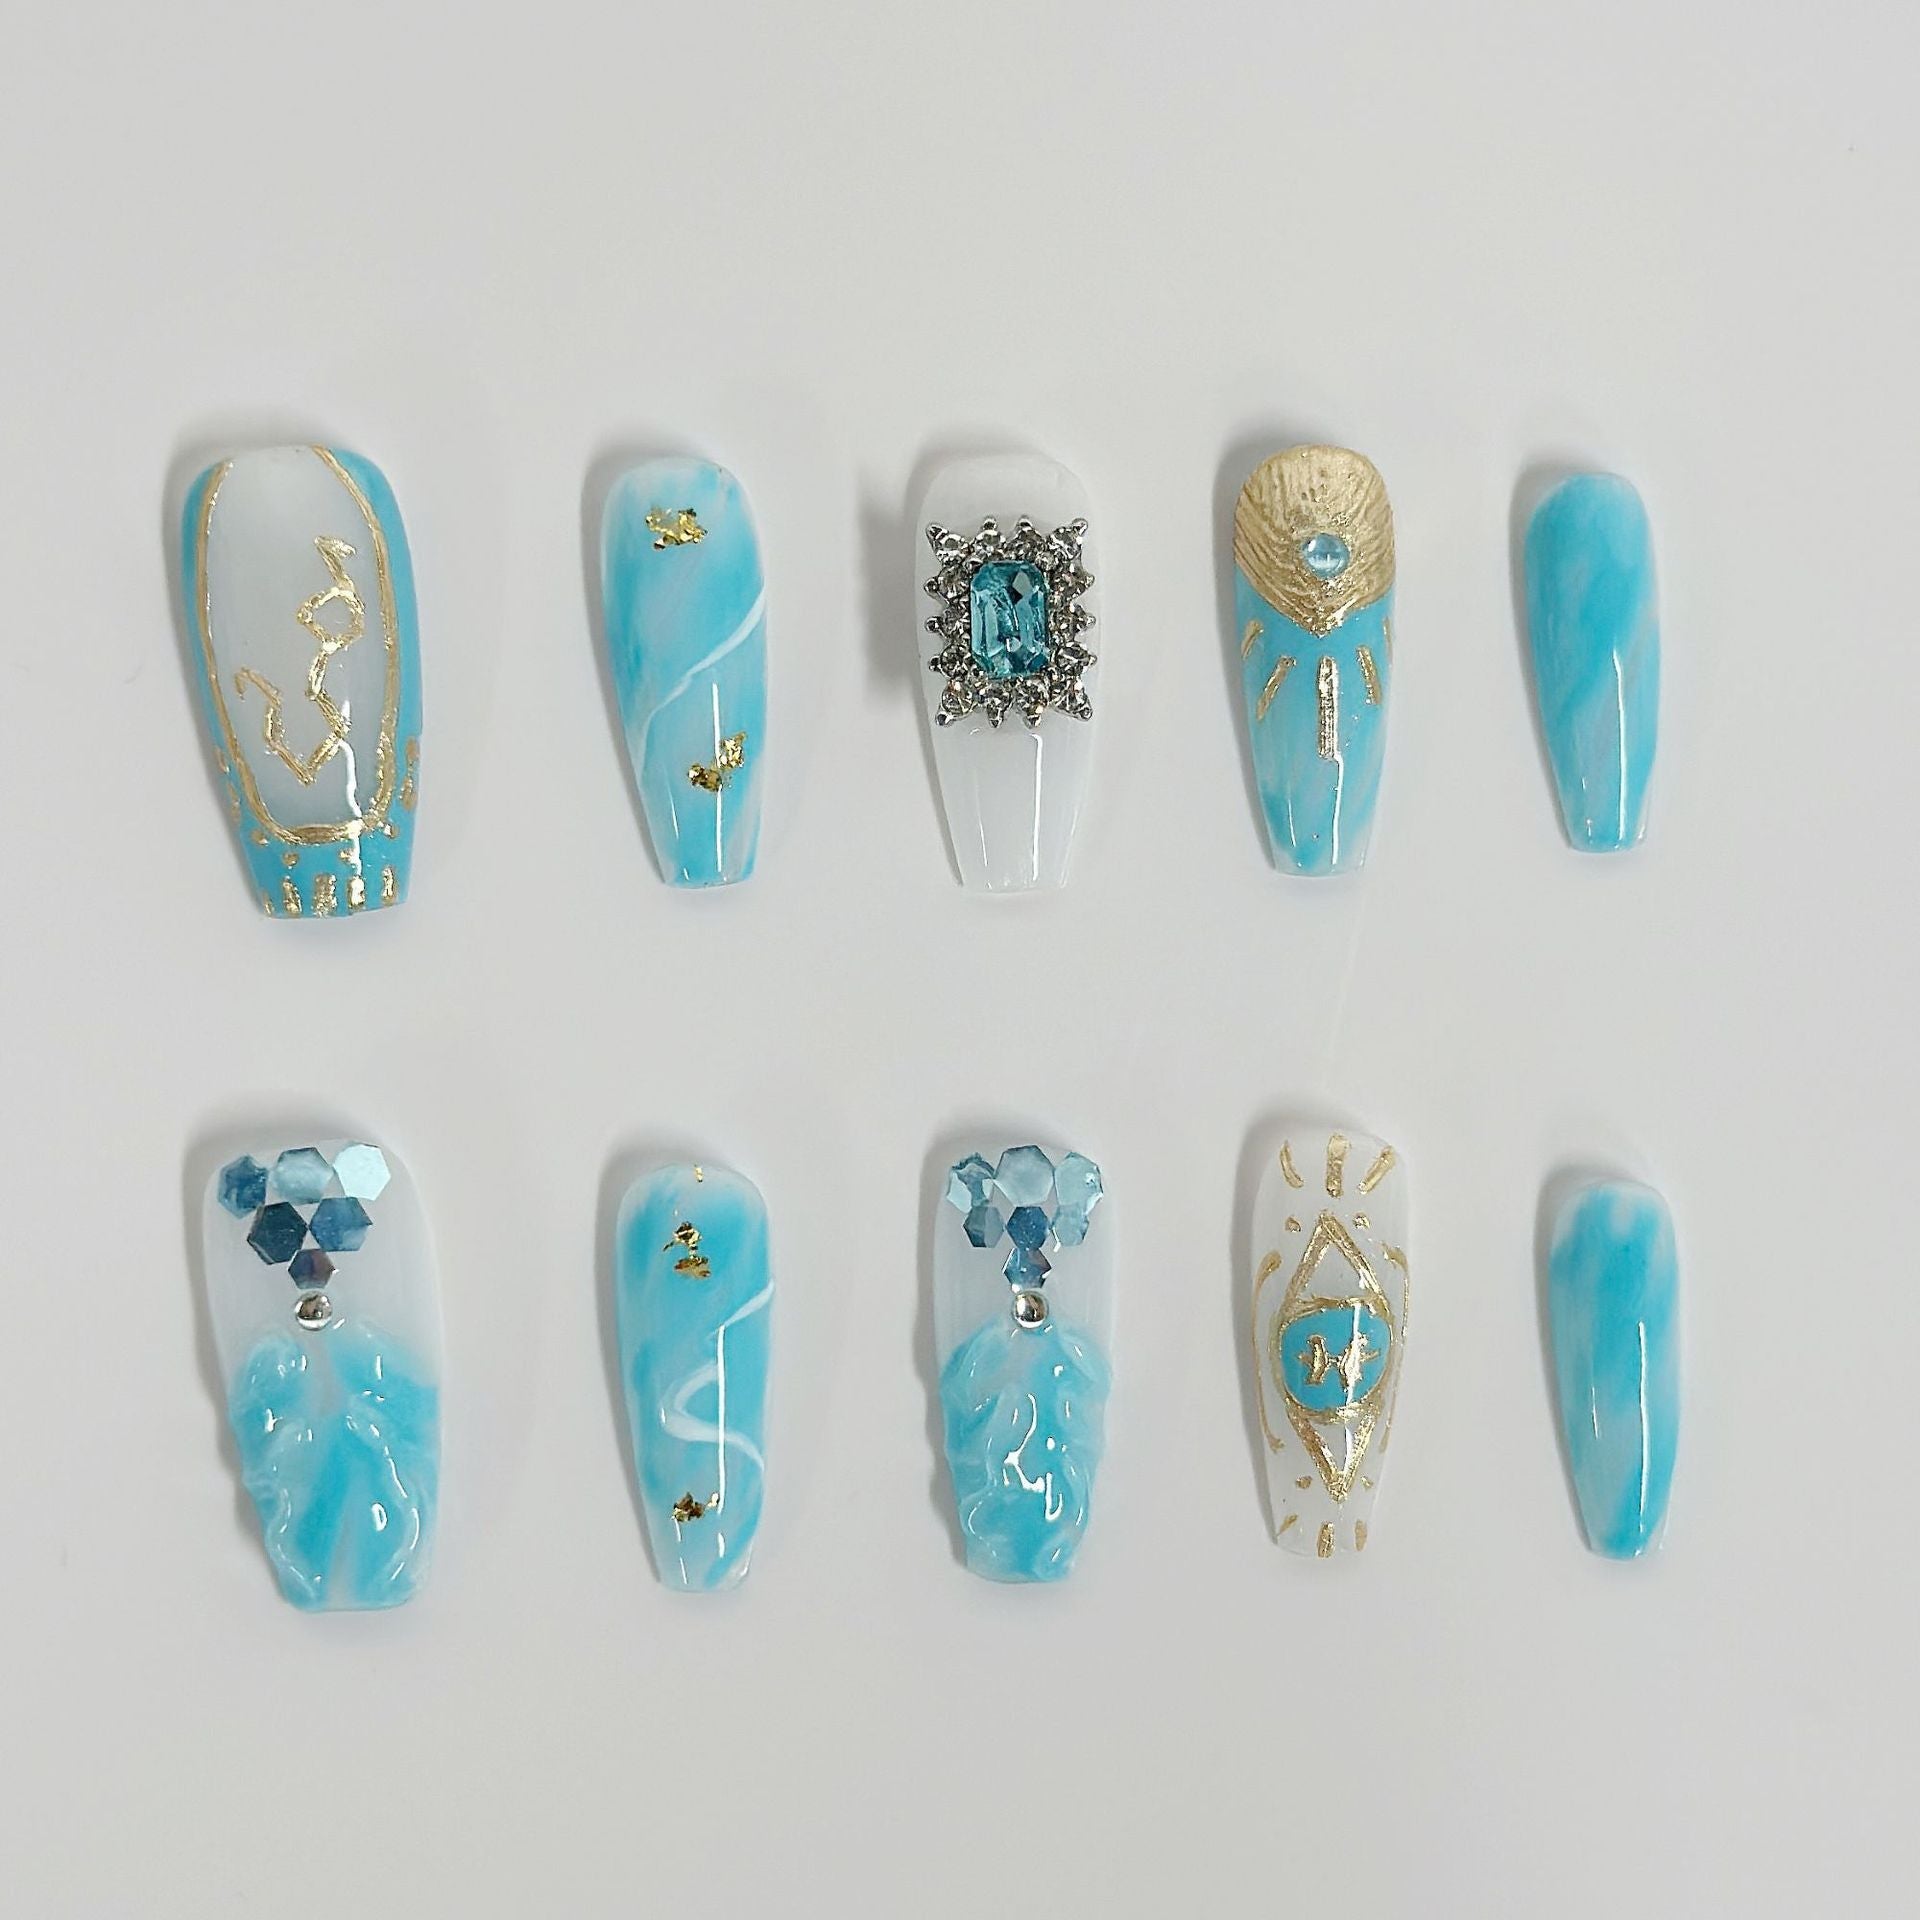 Pisces Twelve Constellations Series Press on Nail - Laura MarlaPress on Nail